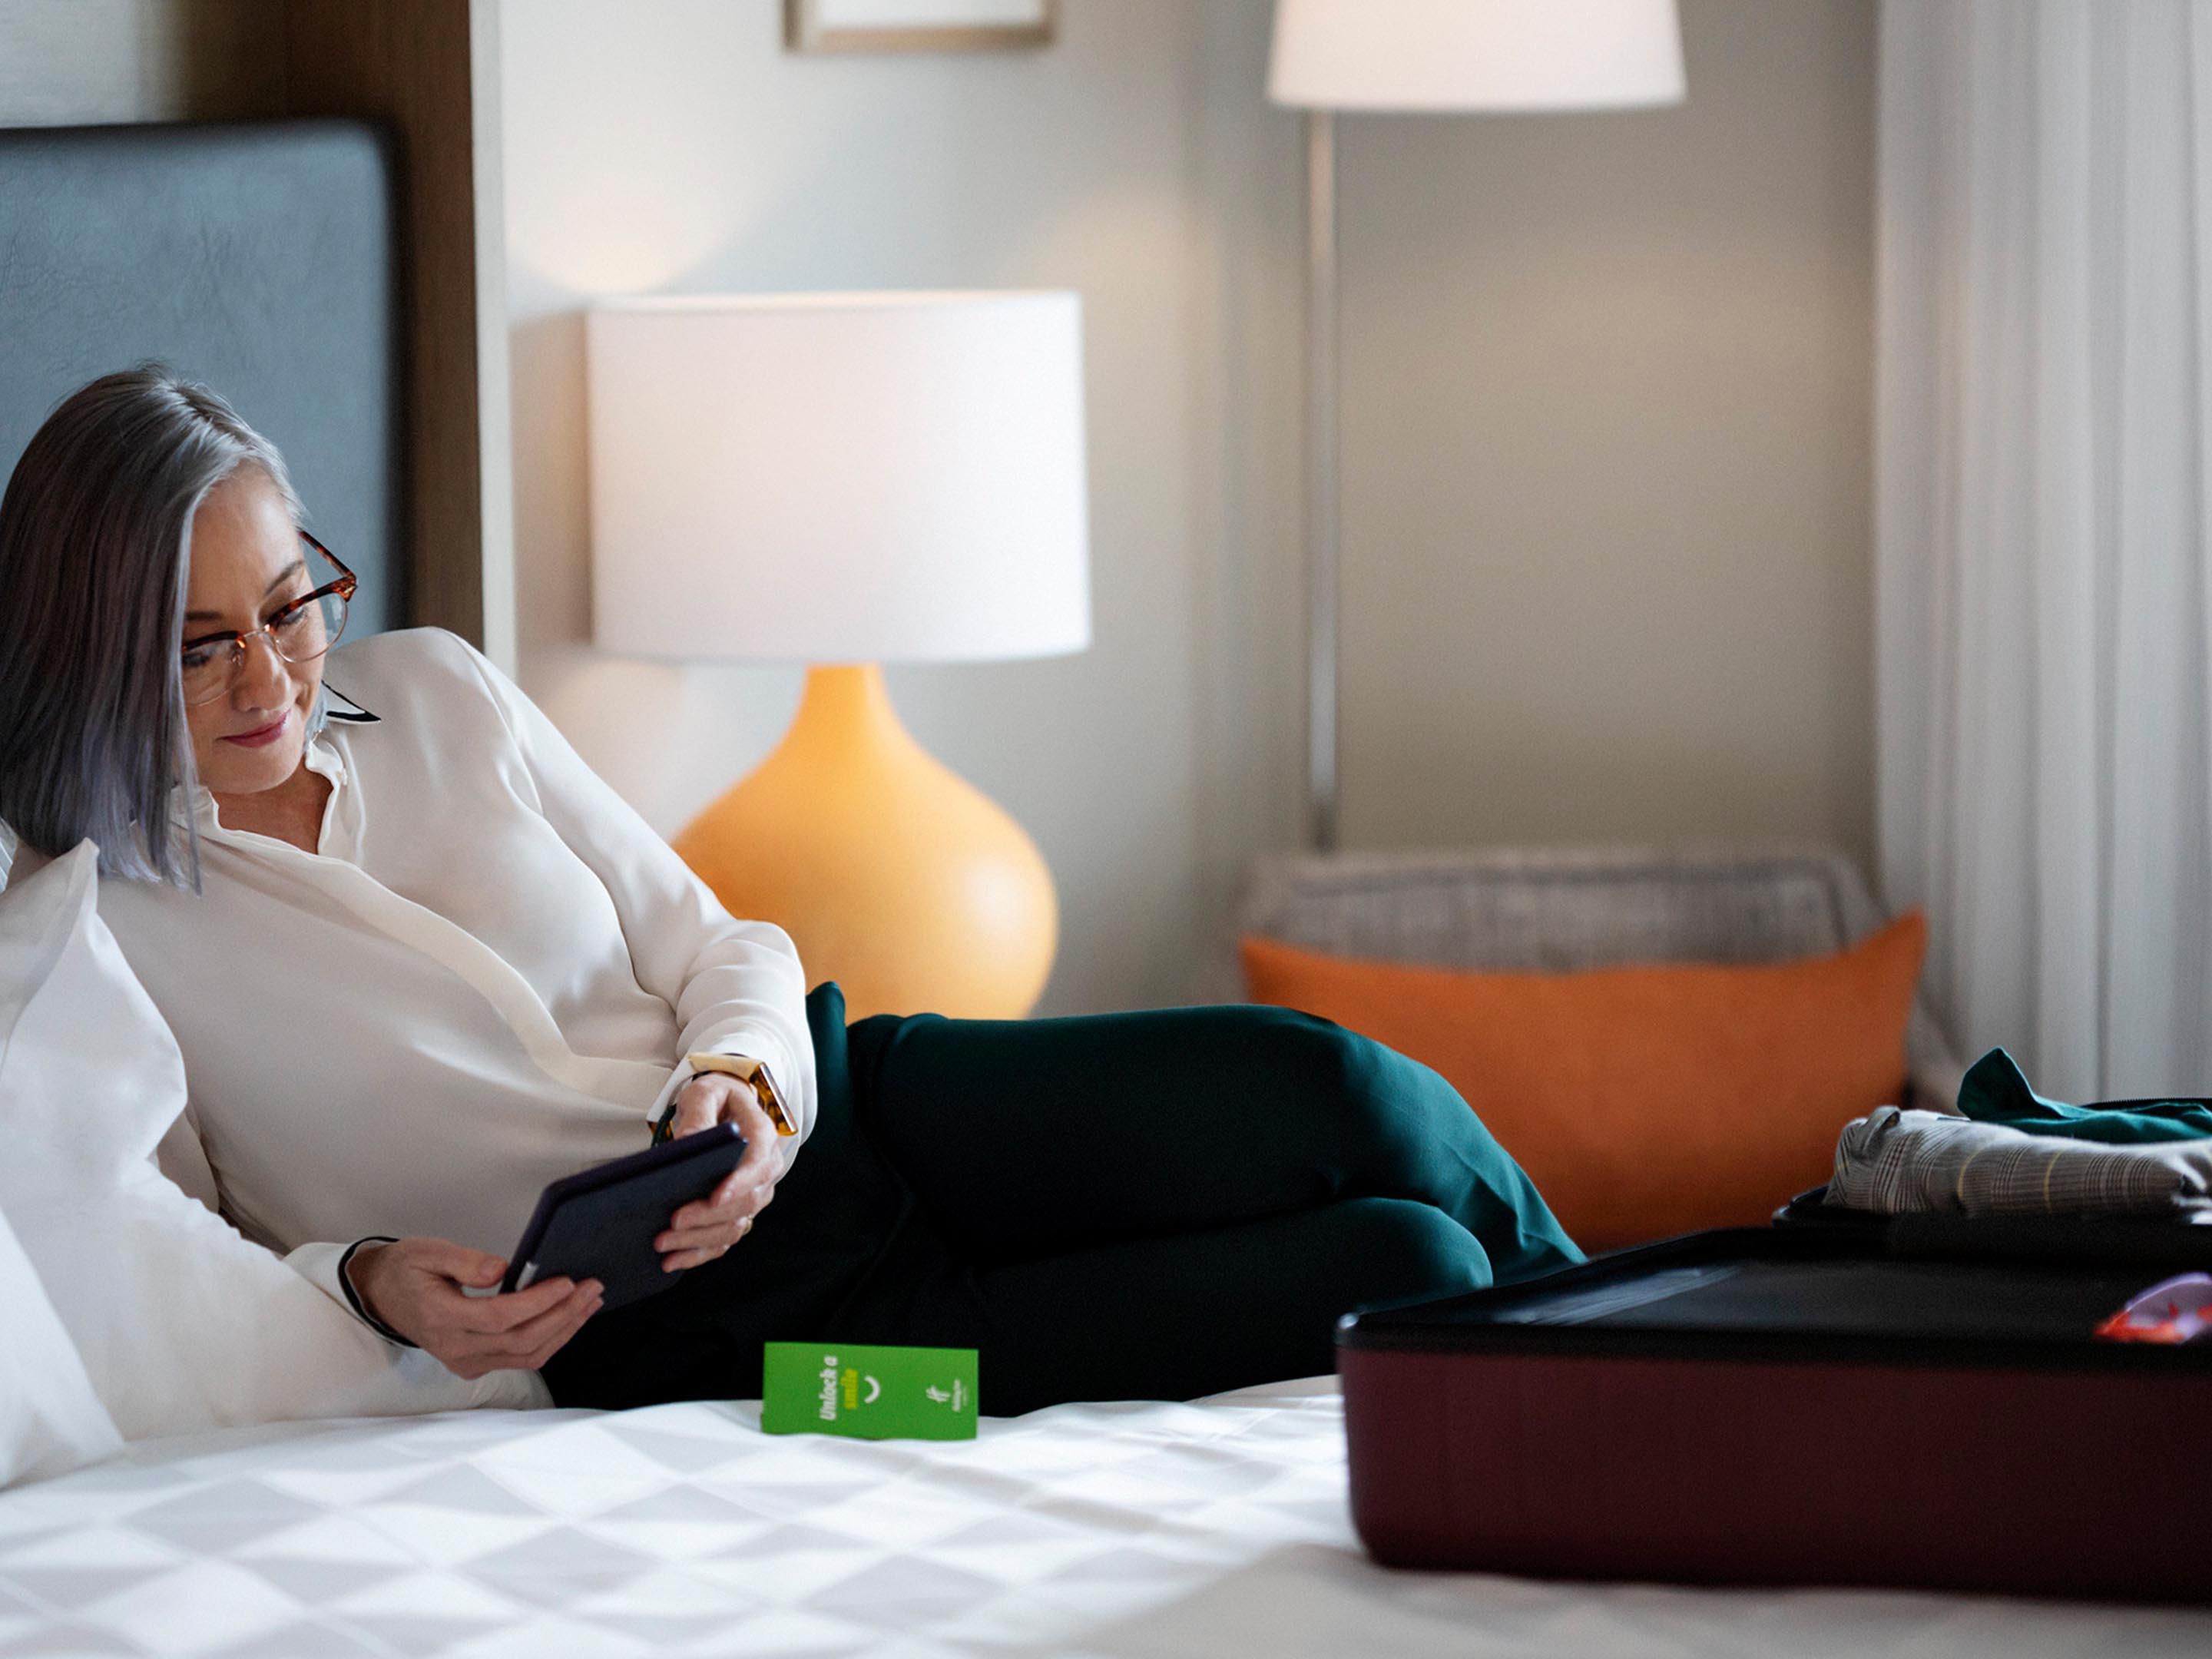 Holiday Inn Allentown loves our business travelers. With brand new guest rooms, a business center, pool and fitness center. We have all the amenities and a perfect location to your local Allentown office. Call now at 610-366-1600 to book your next stay or email with group inquiries!